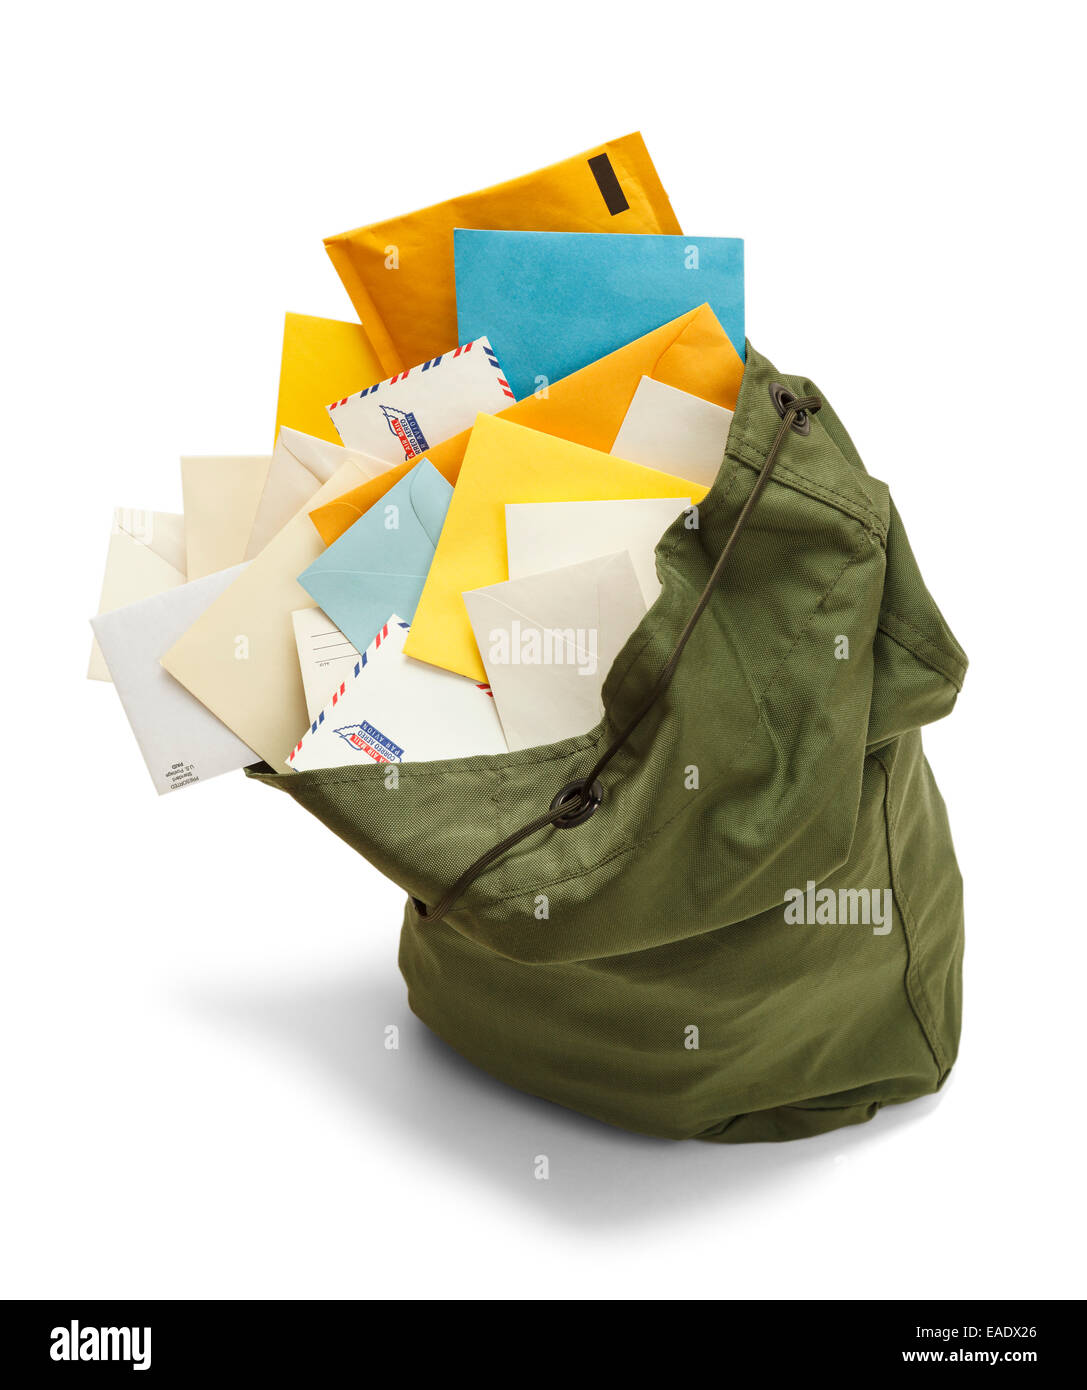 Large Green Mail Bag with Envelopes Spilling Out Isolated on White Background. Stock Photo